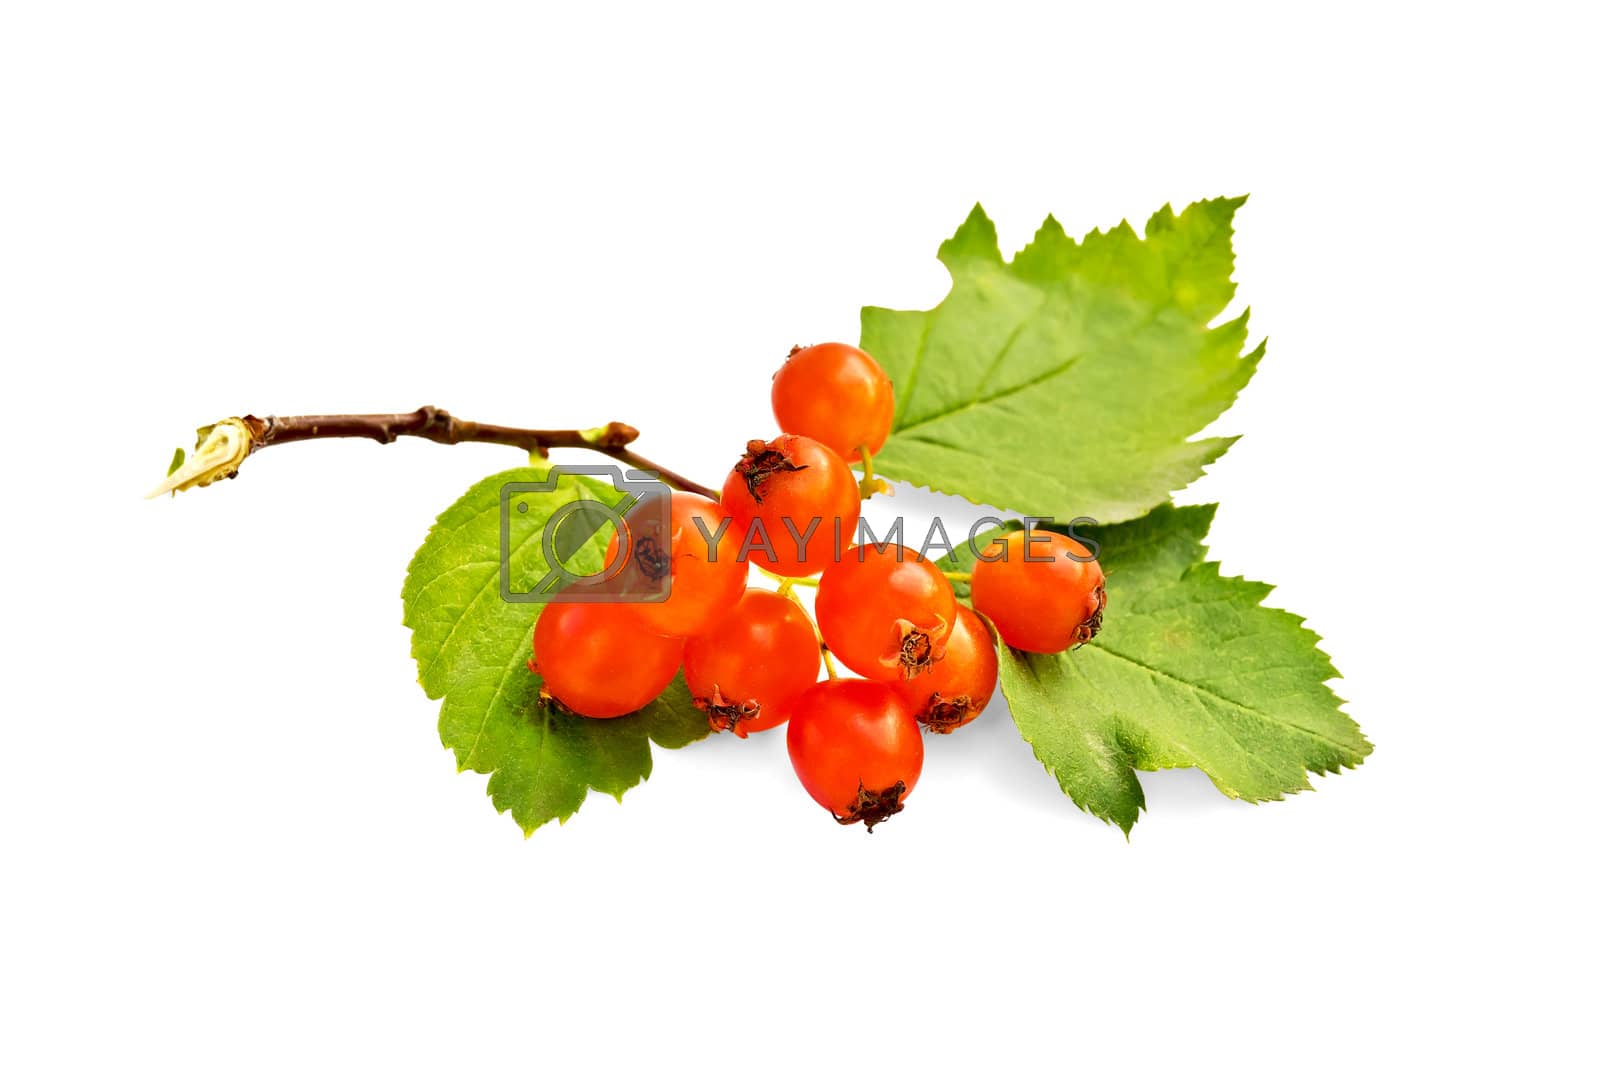 Royalty free image of Hawthorn orange with leaves by rezkrr